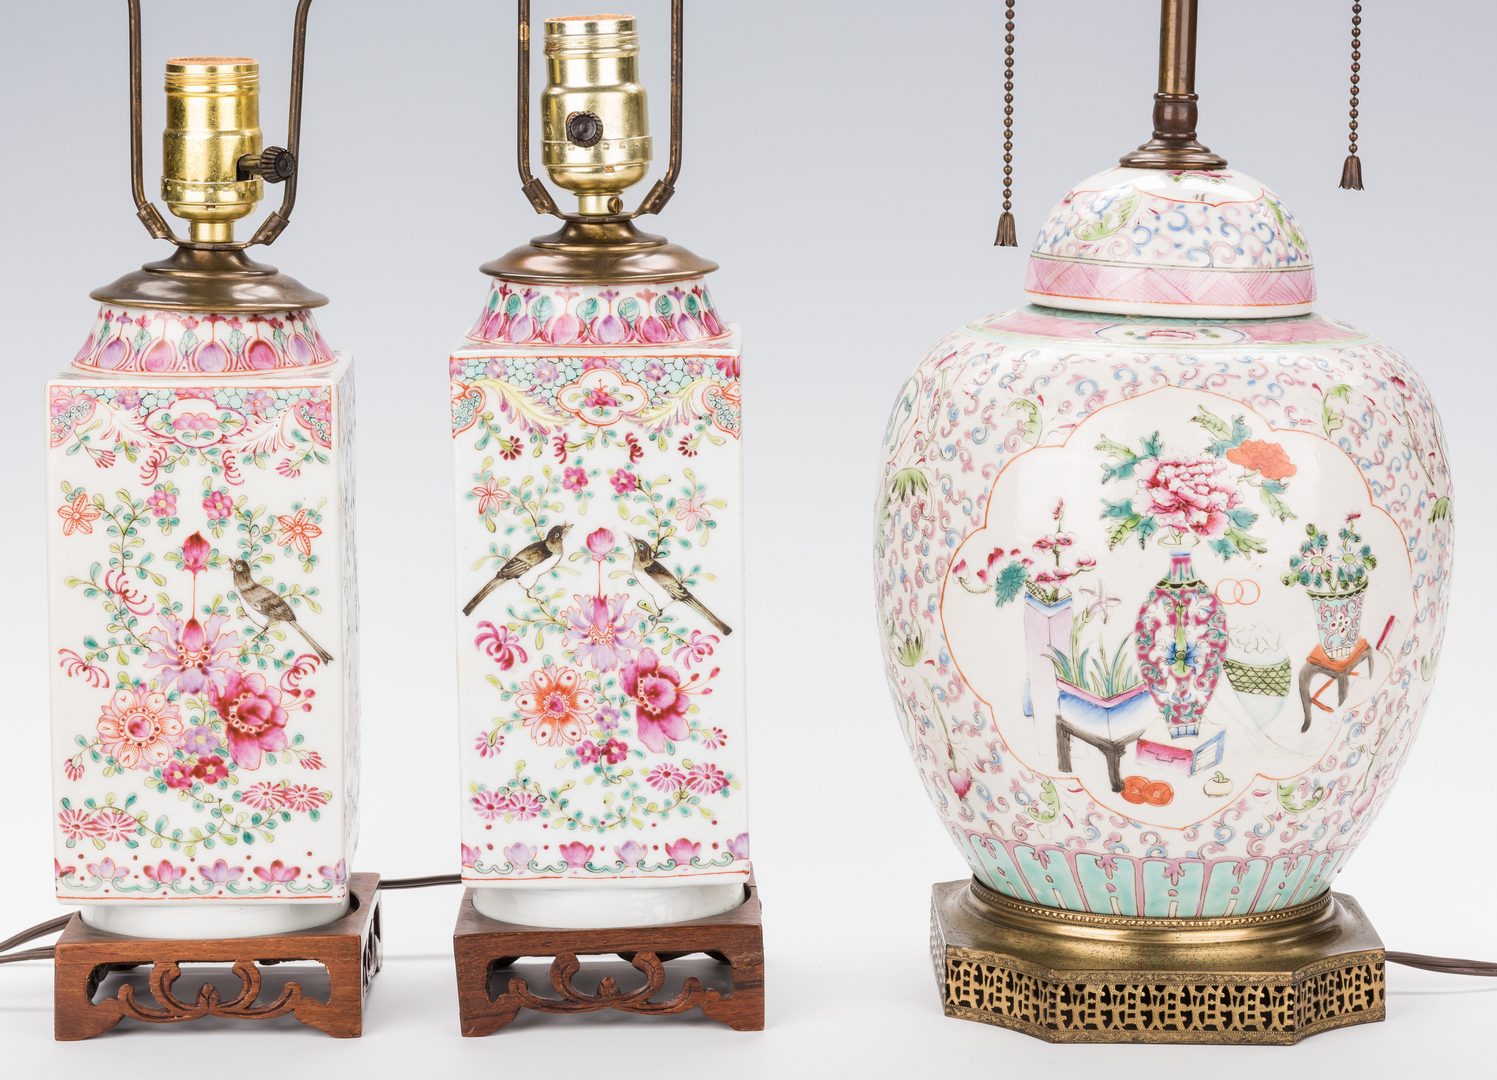 Lot 31: 3 Chinese Export Porcelain Lamps